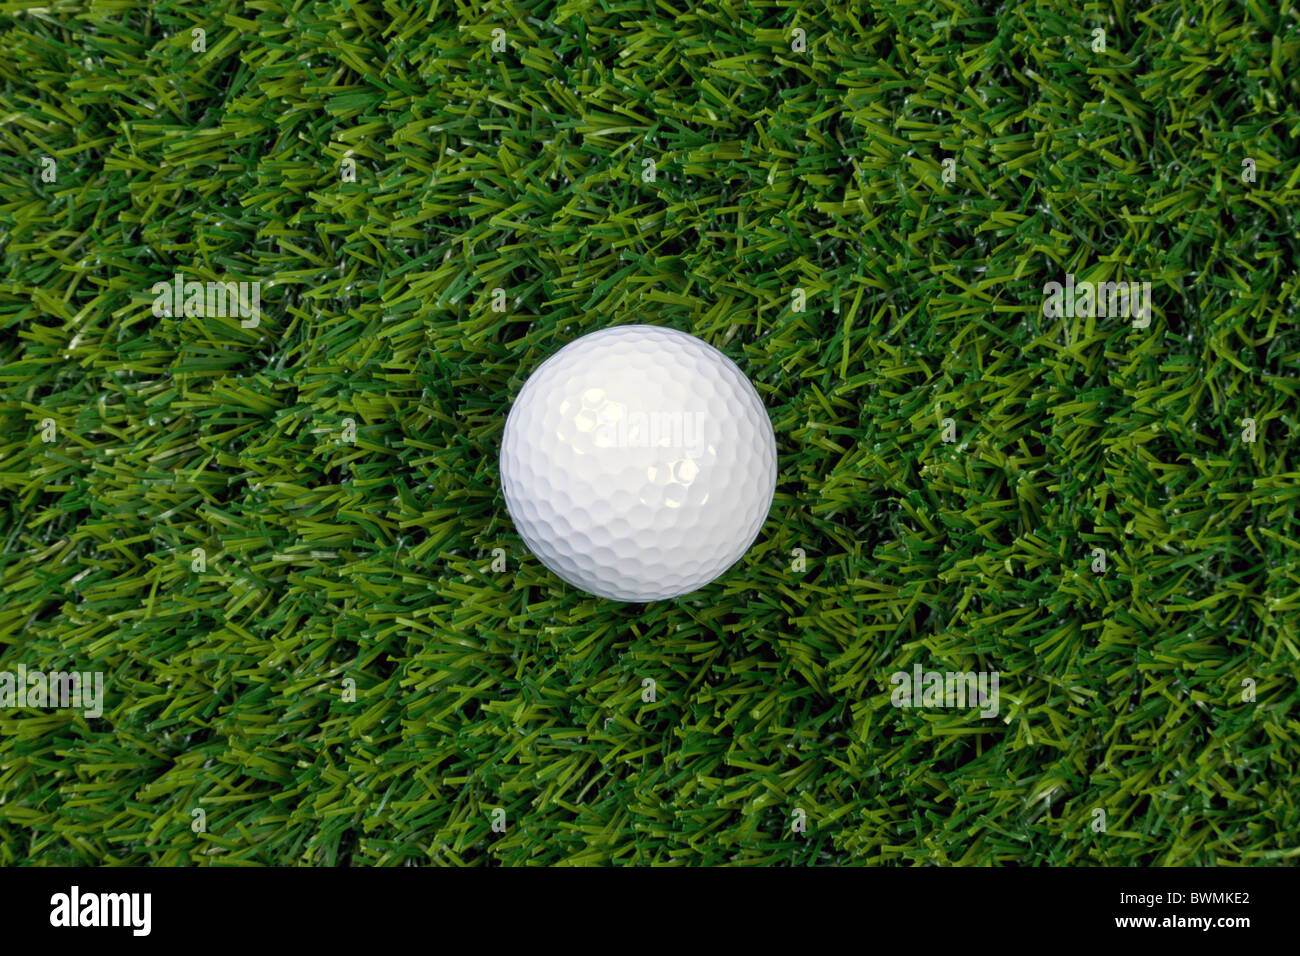 A photo of a golf ball on grass Stock Photo